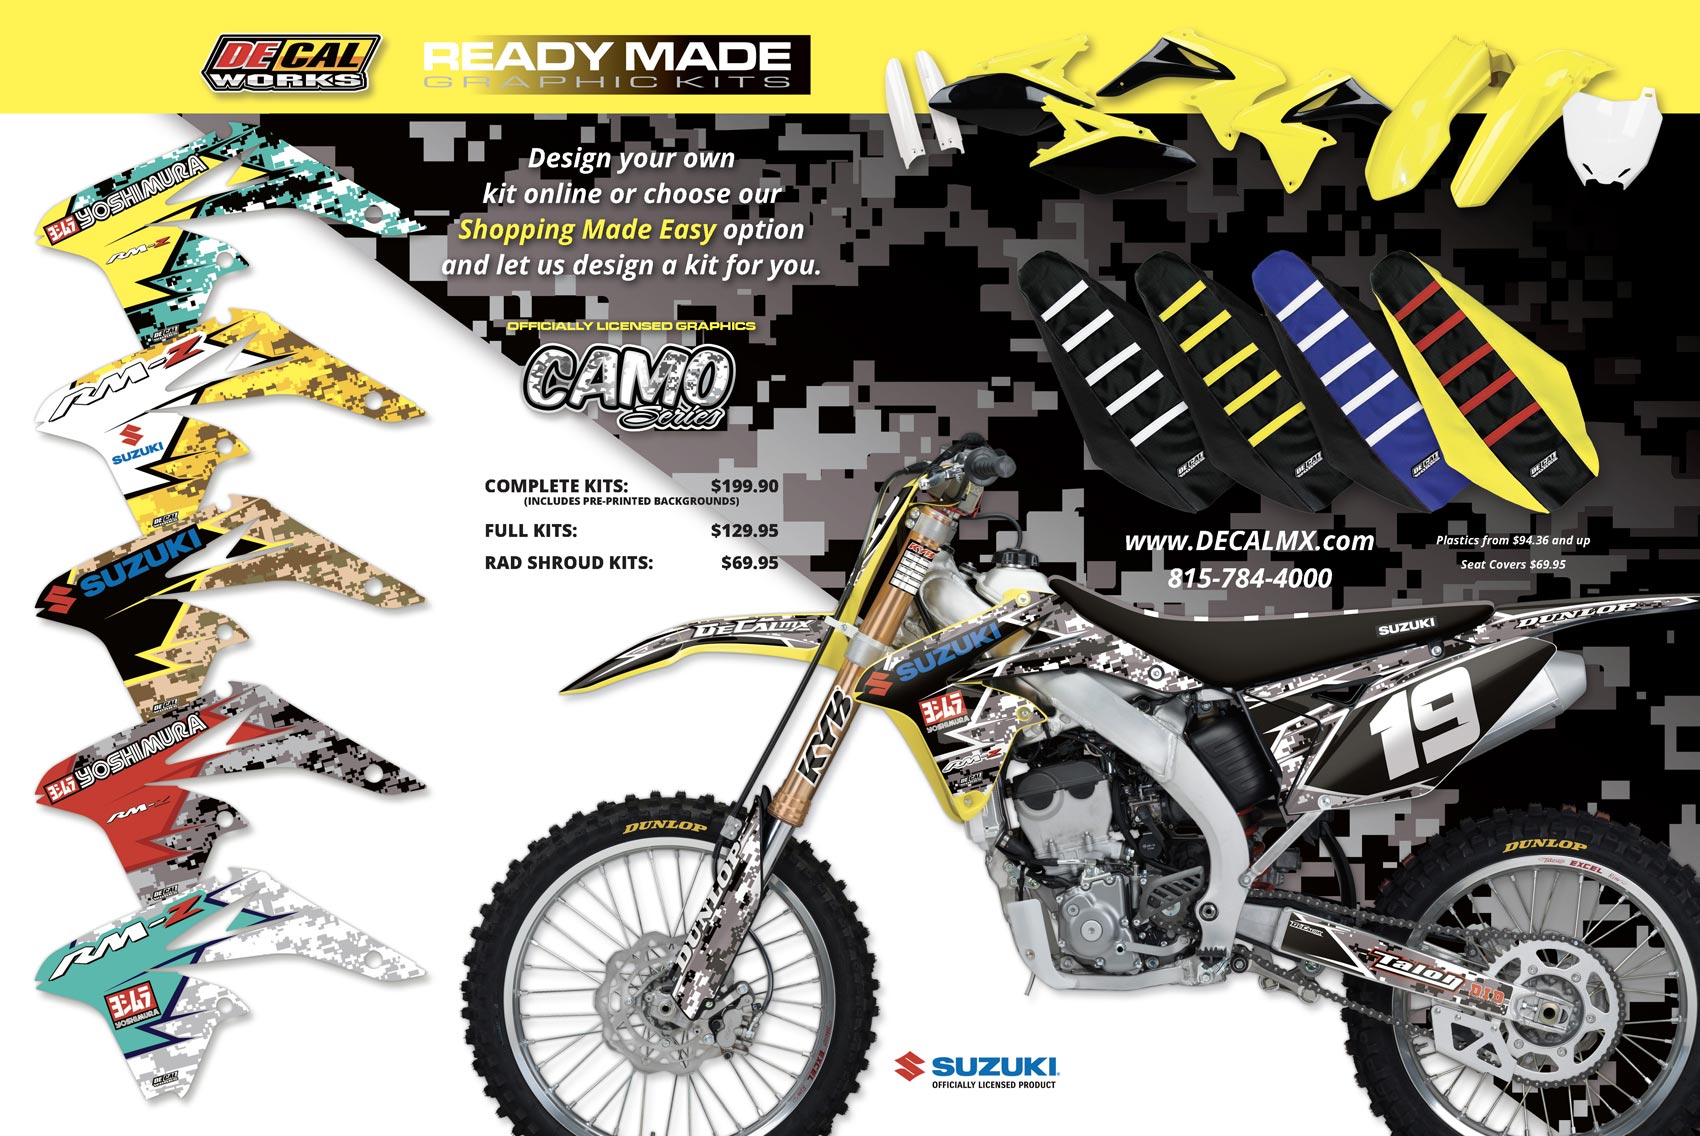 Racer X August 2019 - Decal Works Advertisement